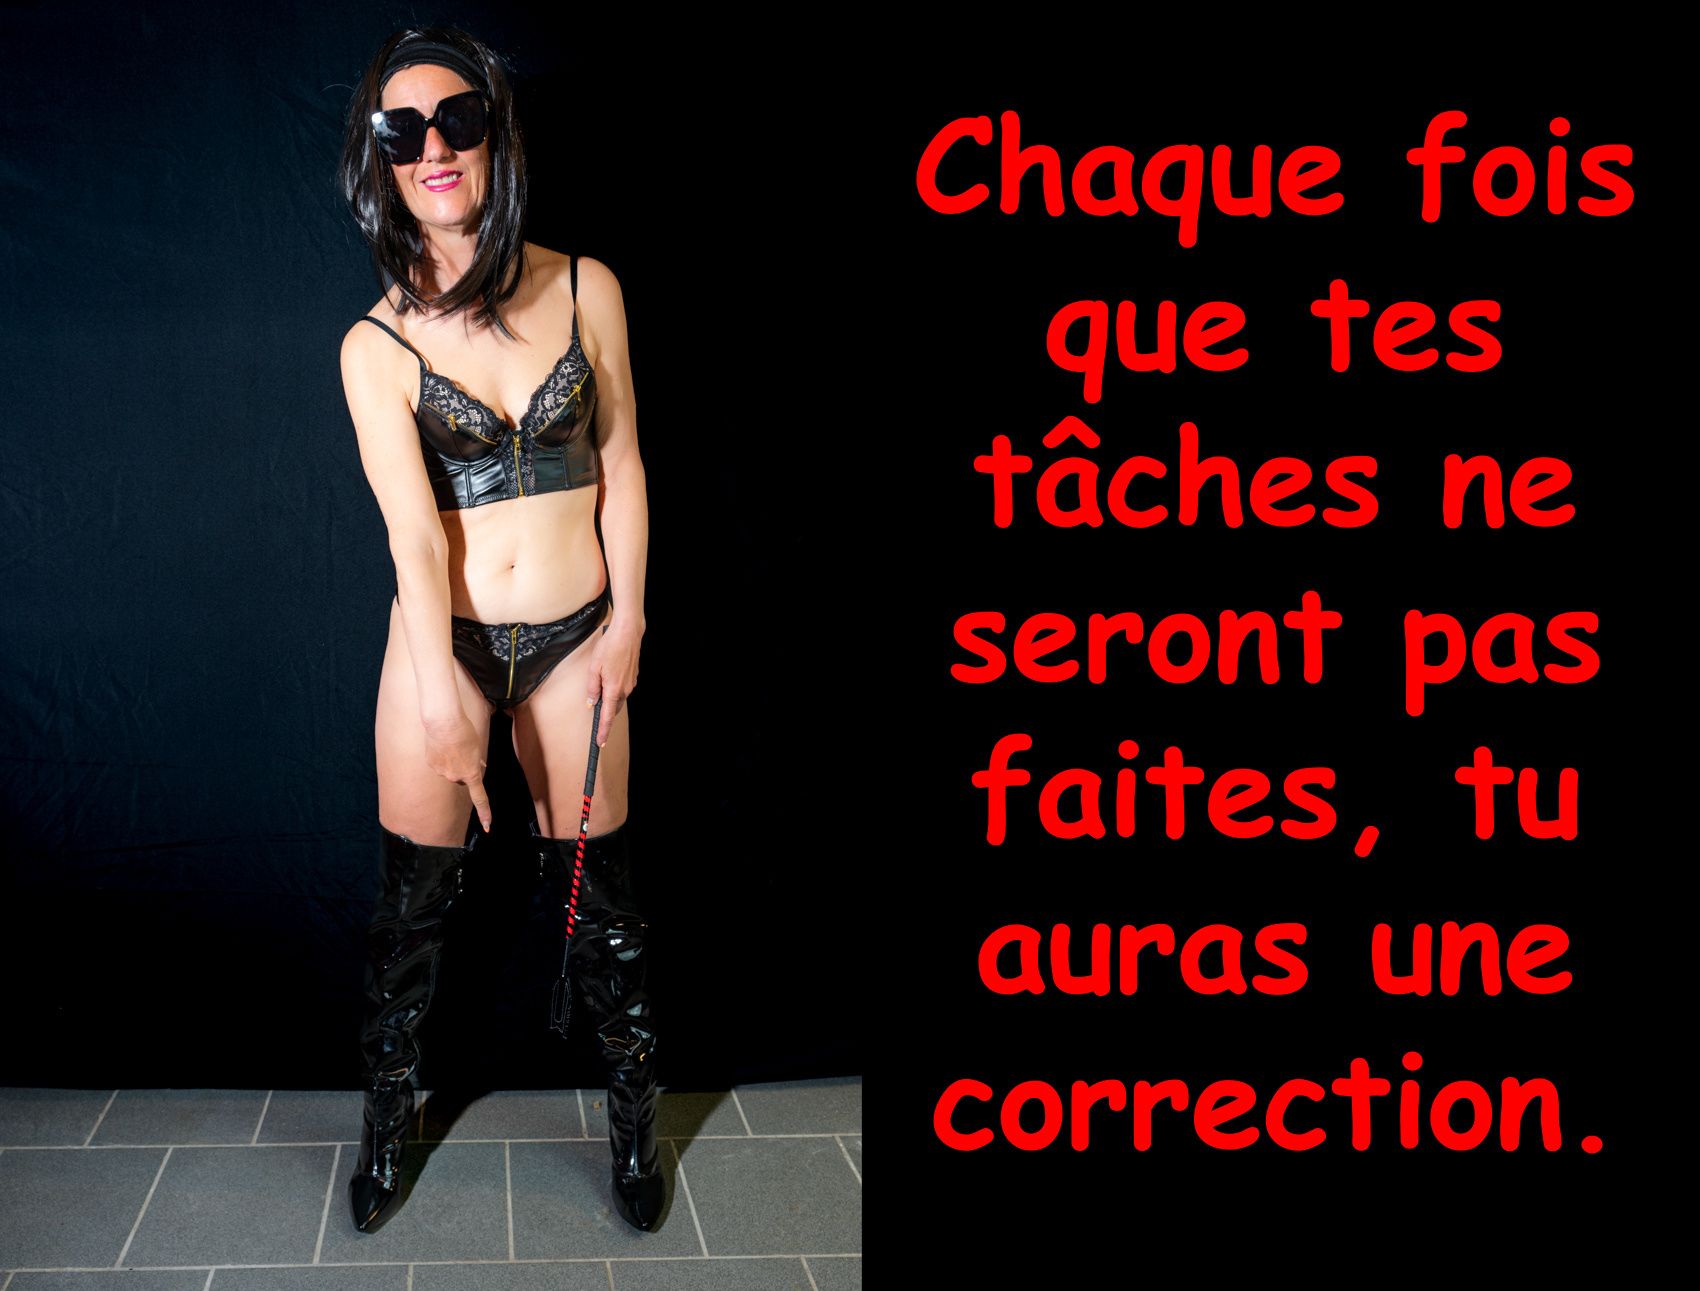 captions about chastity and femdom 450-550 #59